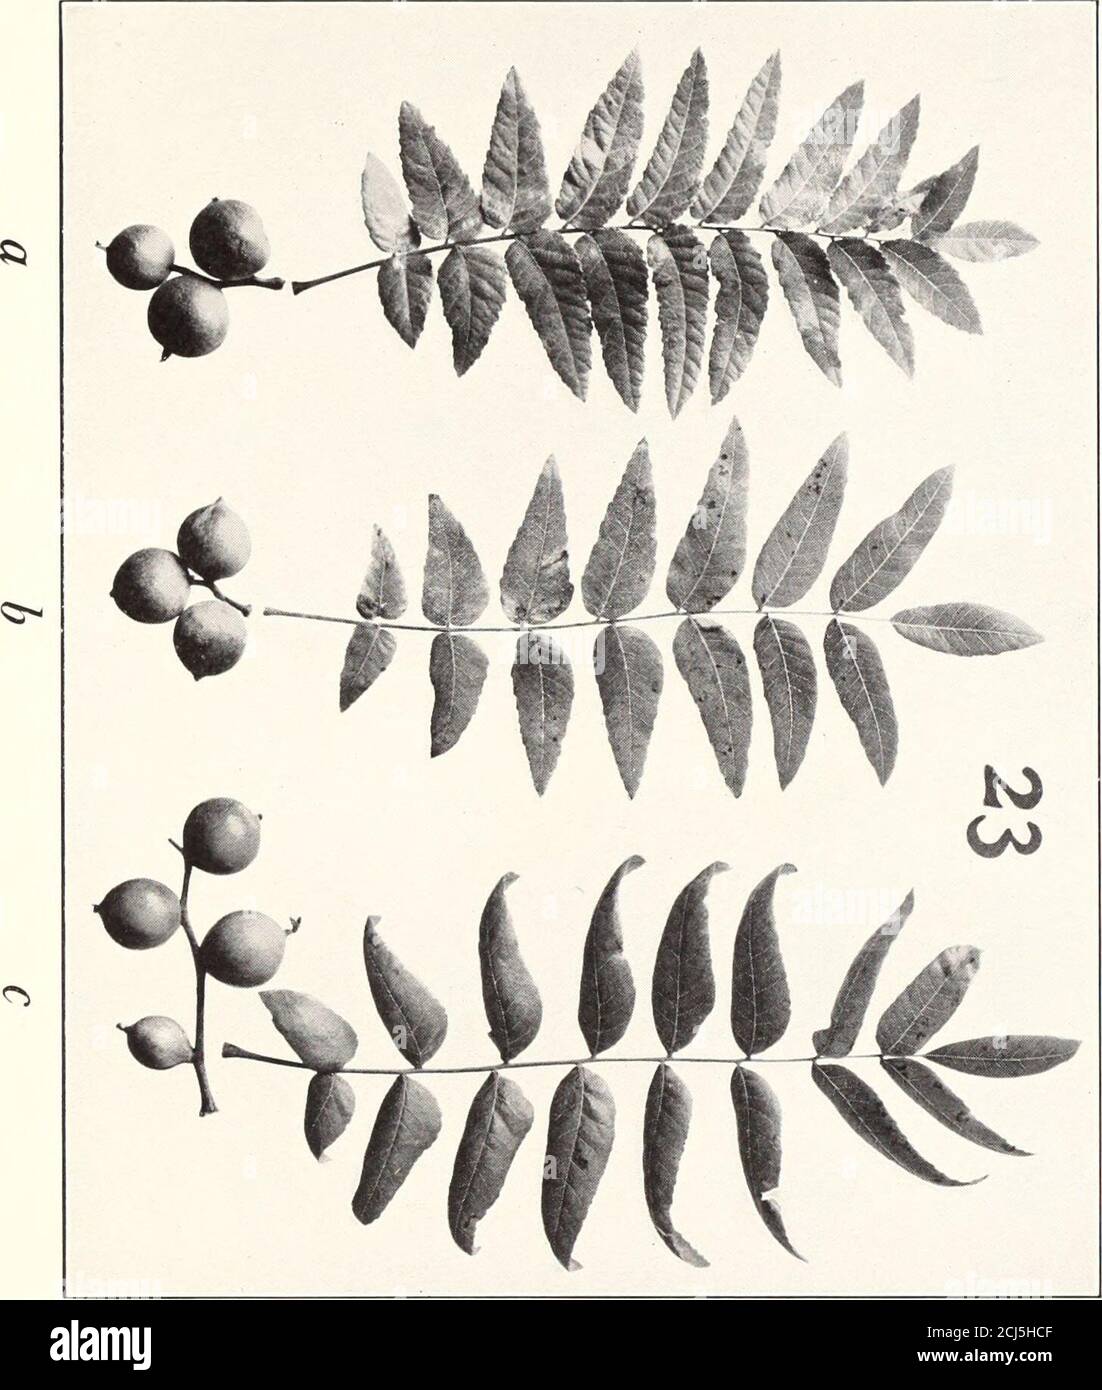 . Studies in Juglans . &gt; 0CICD &gt;CO o CO n on PLATE 14 Juglans californica X Quercus agrifolia Fig. 2—a, leaf and fruits from F! seedling No. 23a. Fig. 2—b, leaf and fruits from F, seedling No. 23b. Fig. 2—c, leaf and fruits from F, seedling No. 23c. The nuts from which these three F, seedlings grew were borne in thesame cluster on J. californica tree II of 1908 hybridization experiments. X y3. [60]. &lt; o 0 o o o PLATE 15 Juglans californica Watson J. californica var. quercina Babcock Fig. 3.—a, b, c, cl, typical californica seedlings,—e, f, g, h, typicalquercina seedlings. All from th Stock Photo